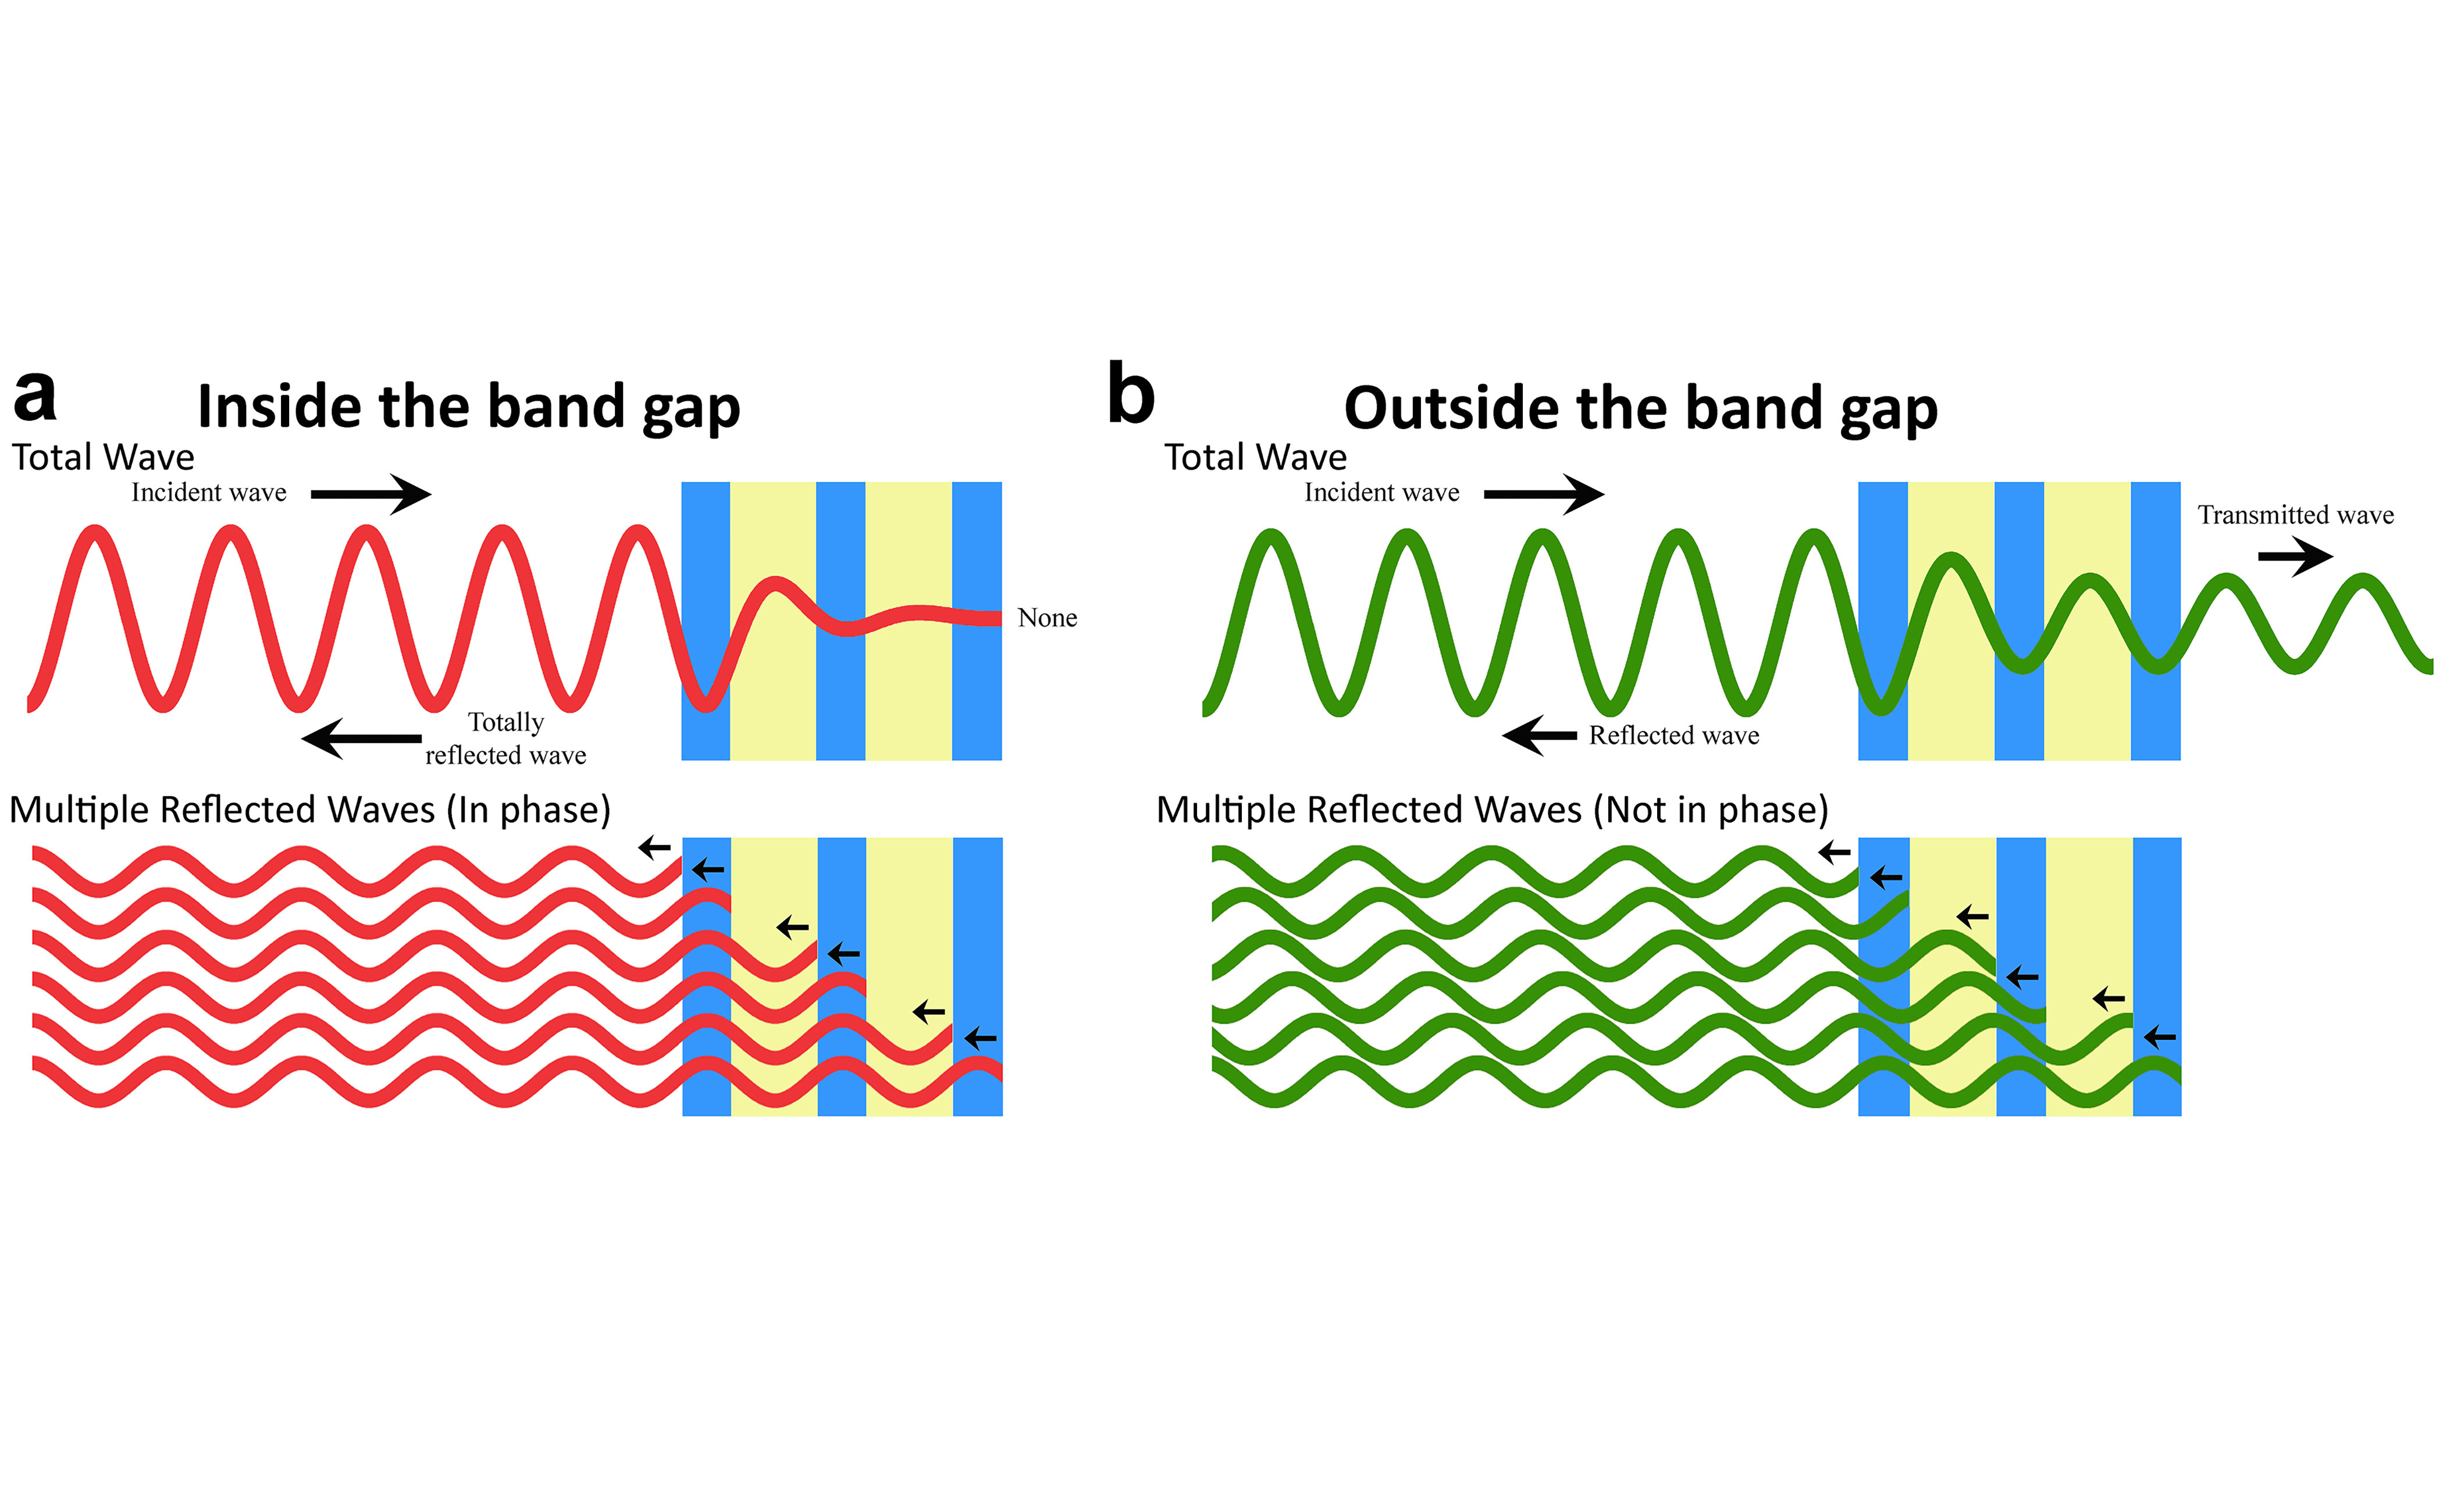 Figure illustrates the bandgap principle. (a) When a wave is incident on a periodic material, multiple reflected waves are created at the interfaces. If these waves are in phase, they interfere constructively and thus prevent the original wave from propagating within the structure. (b) If the multiple reflected waves are not in phase, they do not interfere constructively and the original wave is allowed to propagate. The range of frequencies for which the original wave is forbidden from propagating within t